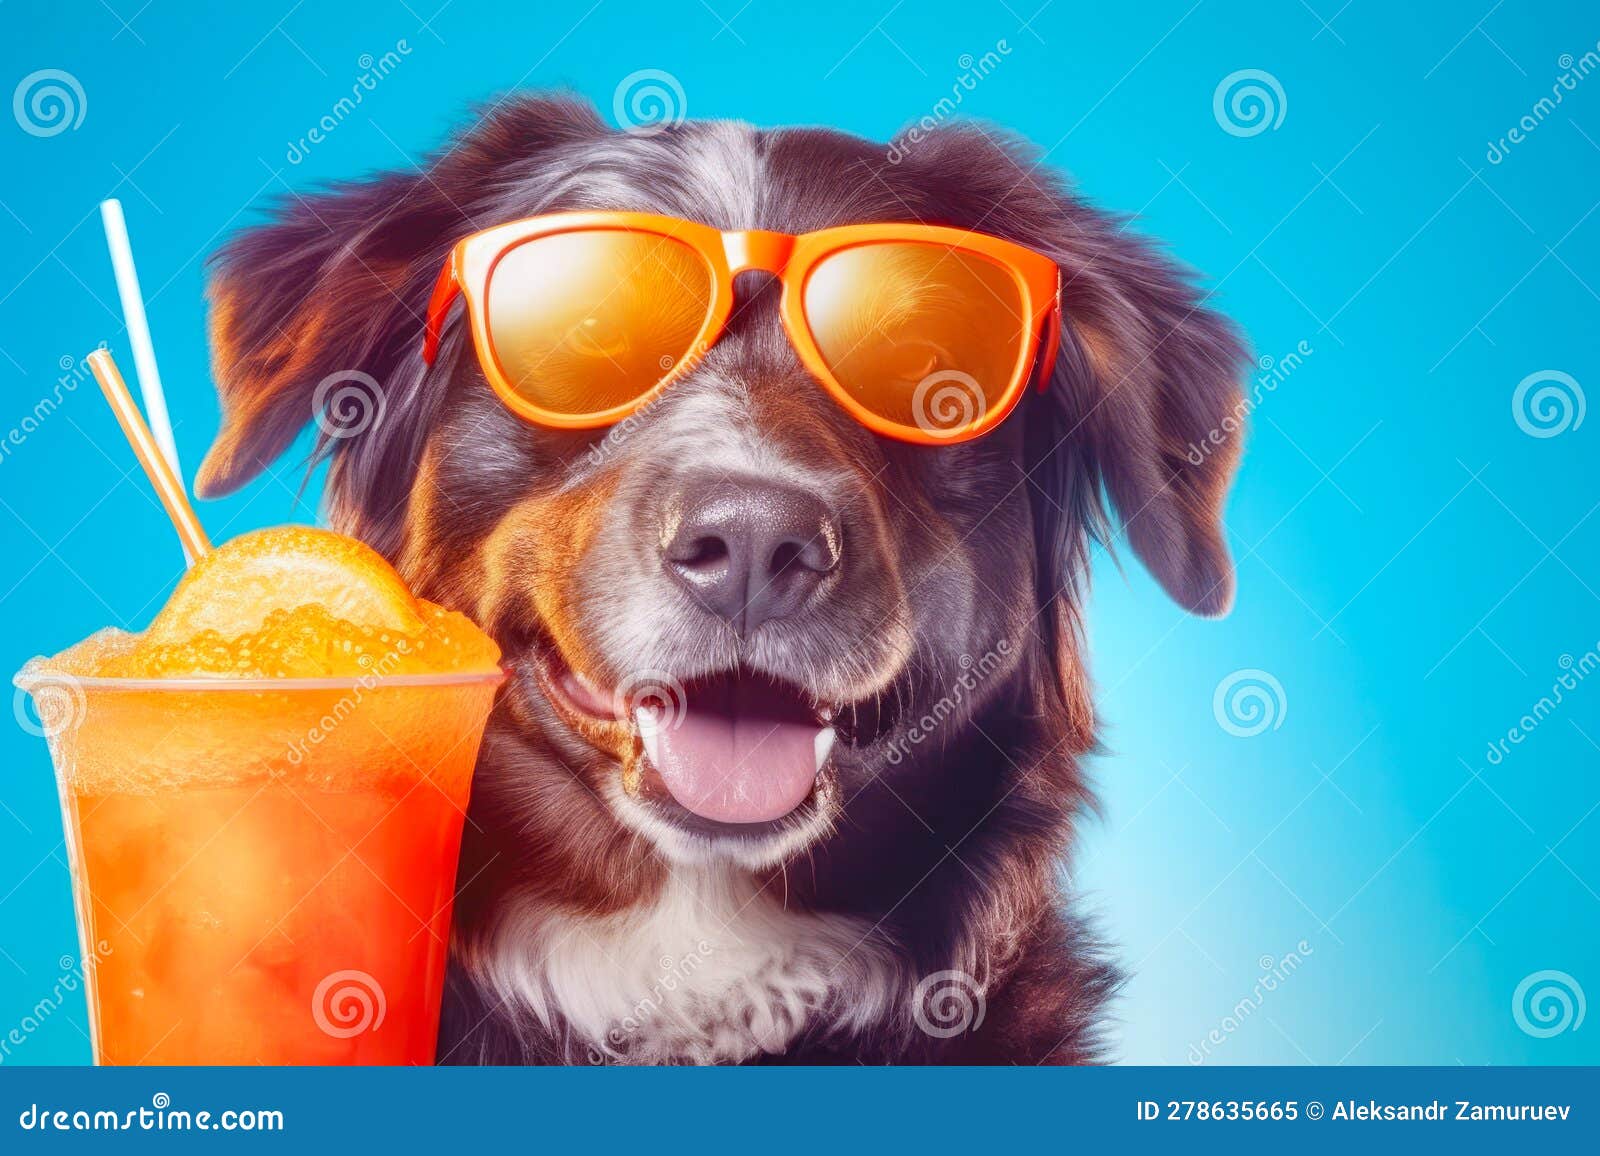 Illustration of Happy Dog Wearing Sunglasses with Cocktail. Funny ...